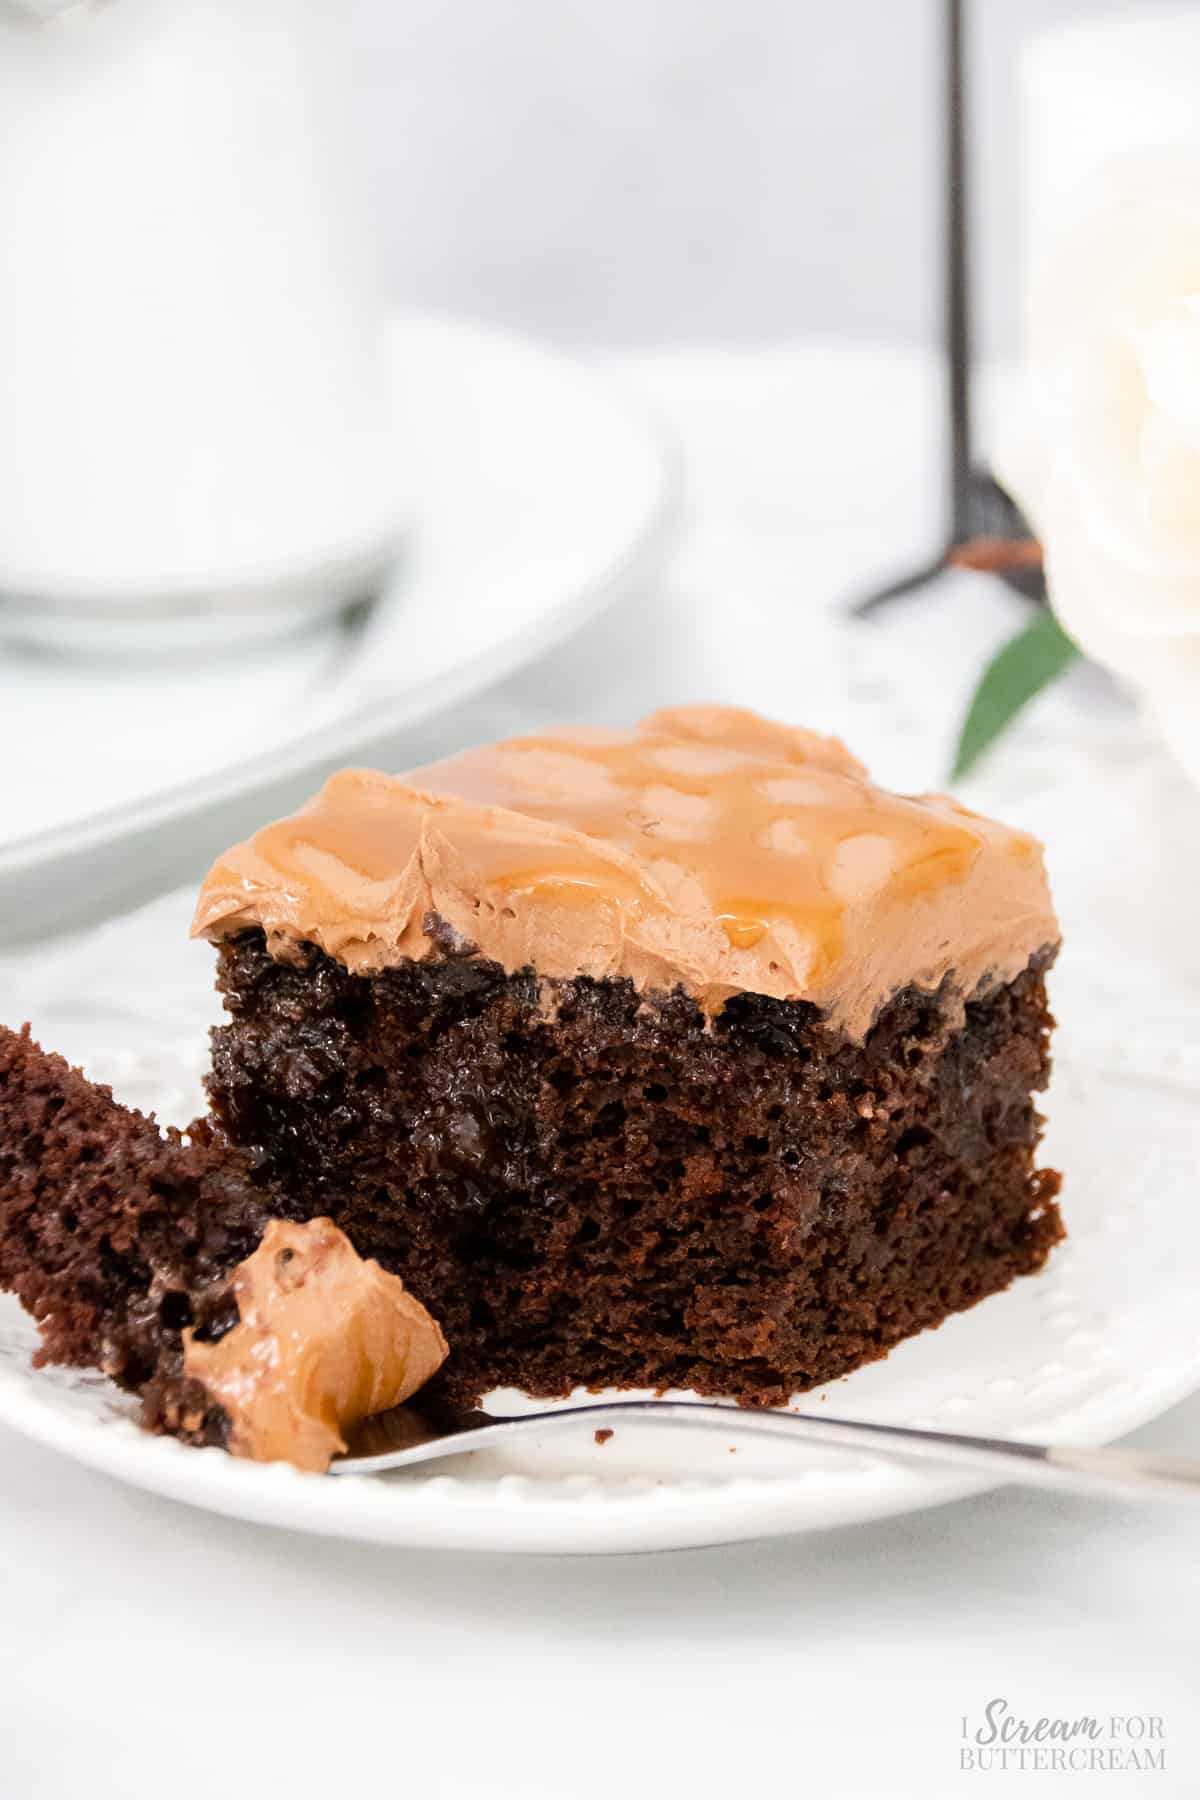 Chocolate cake with caramel buttercream on a plate with a fork.